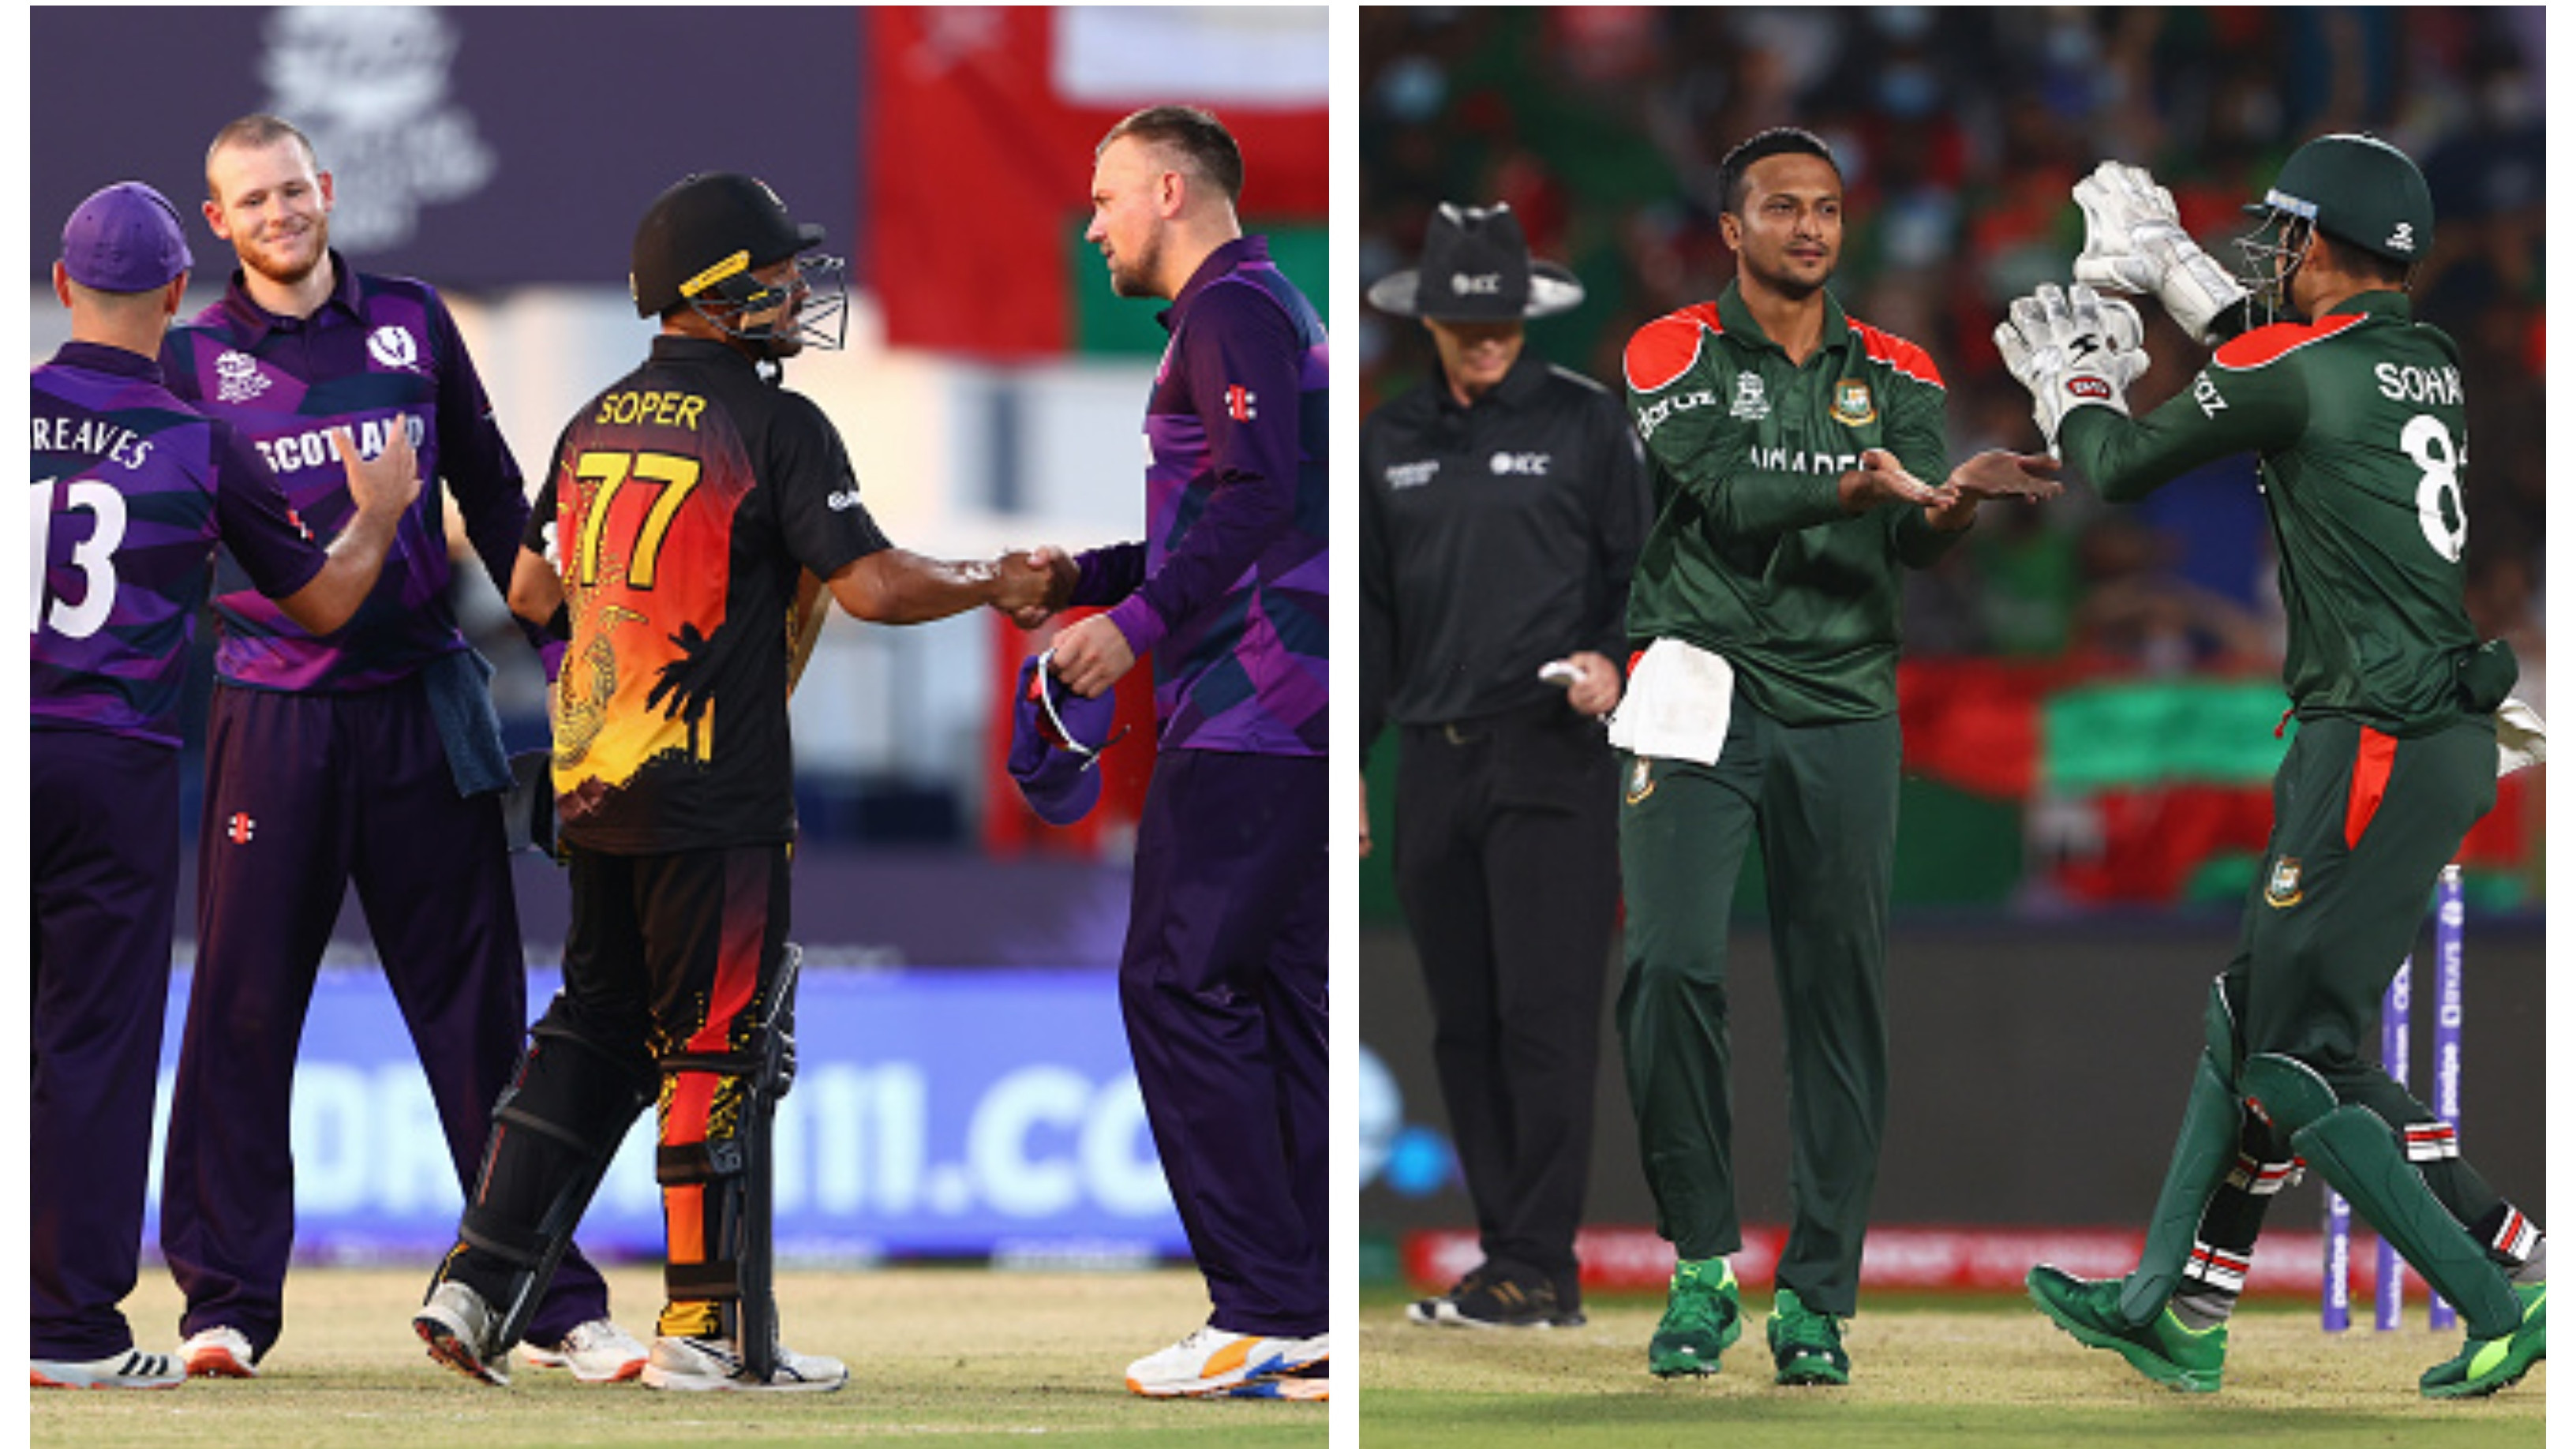 T20 World Cup 2021: Scotland inch closer to Super 12s after 17-run win over PNG; Bangladesh beat Oman by 26 runs